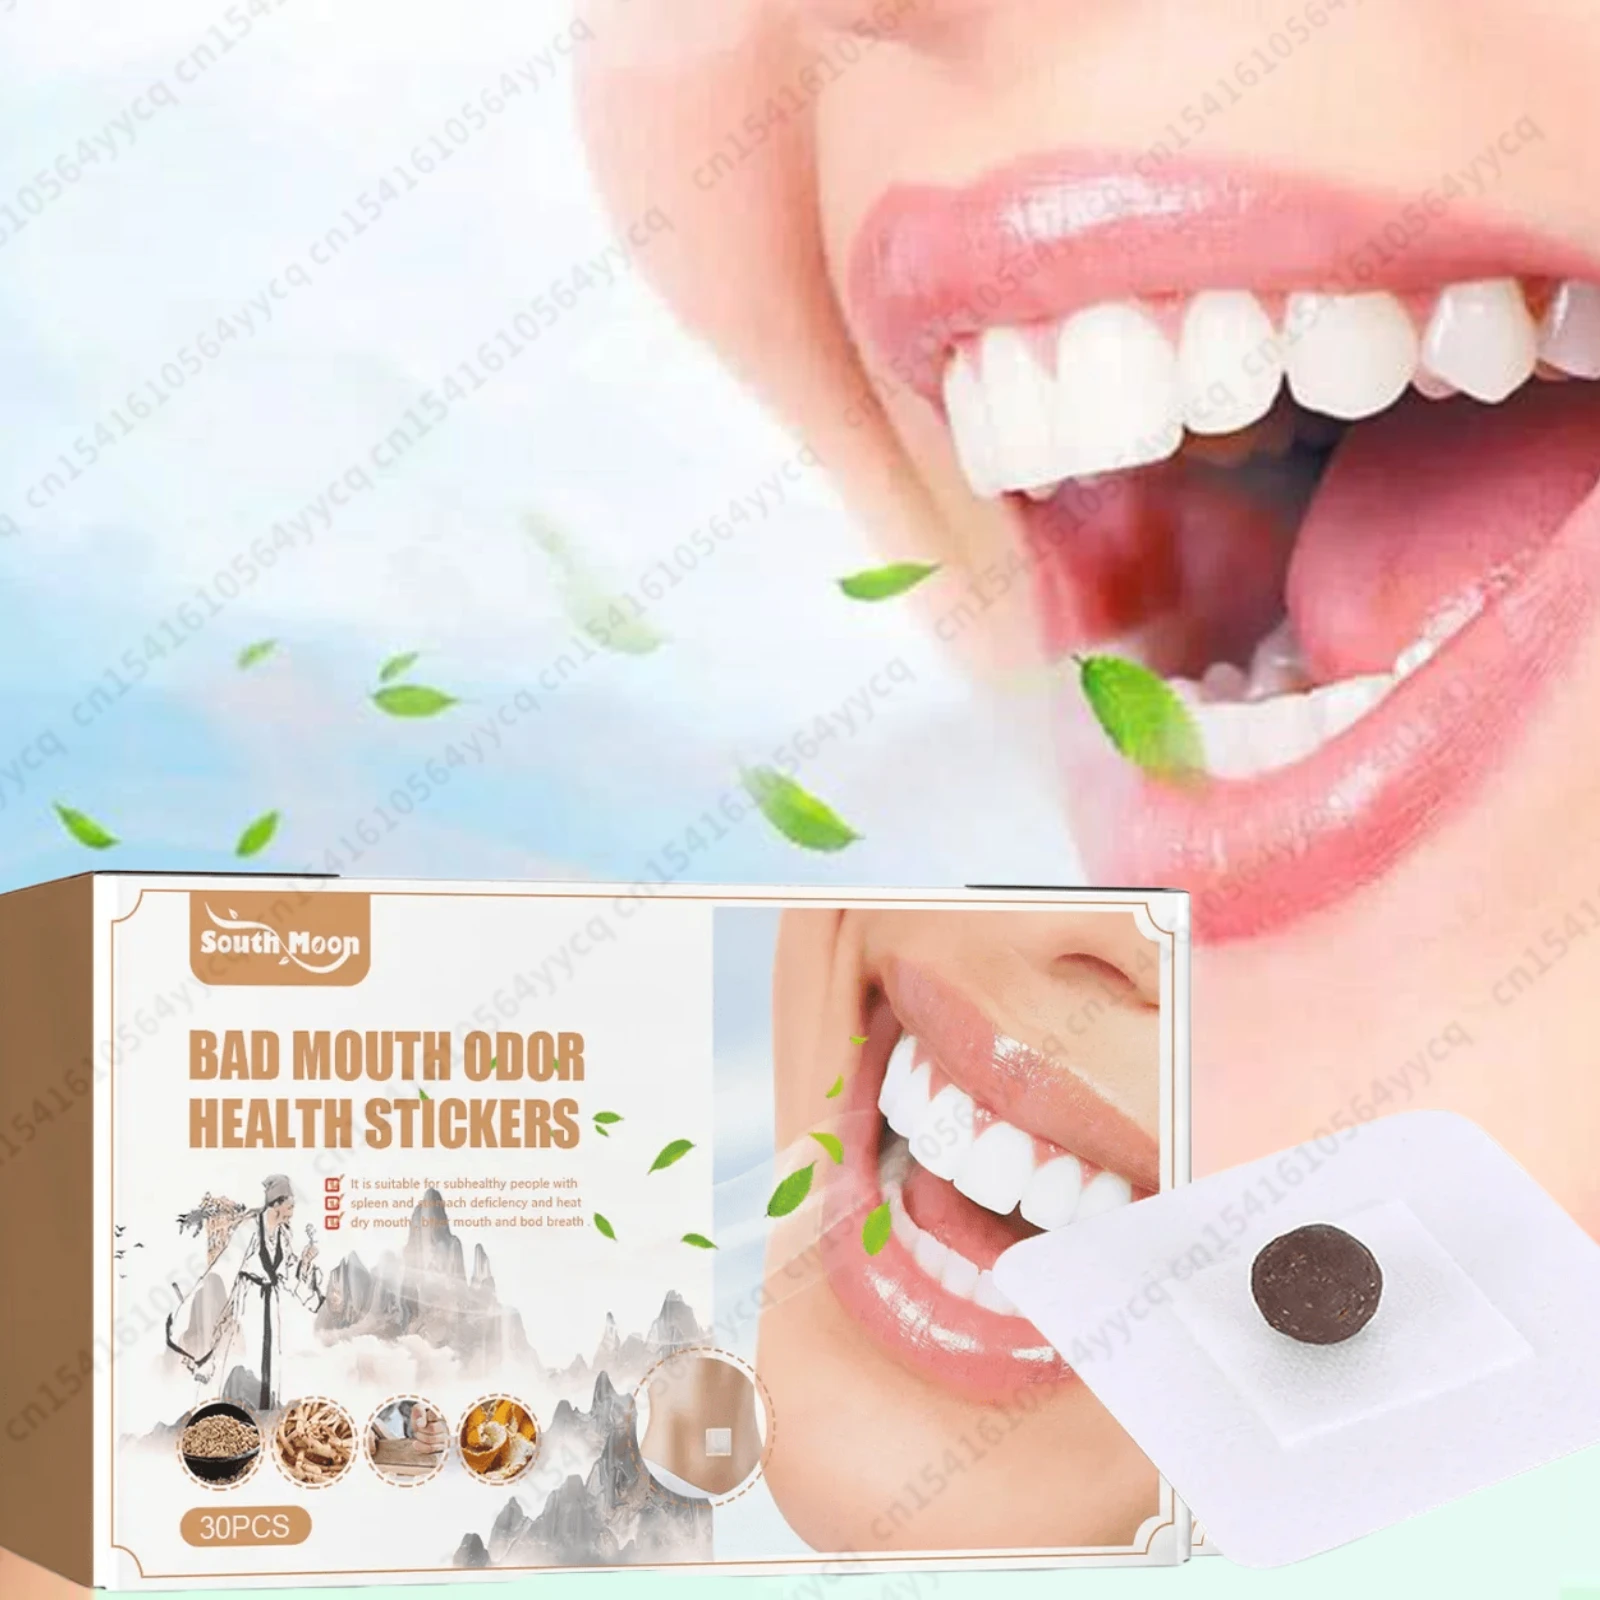 

30pcs Mouth Freshener Patch Remove Bad Breath Oral Odor Treatment Stickers Dry Mouth Bitter Fresh Breath Health Care Plaster